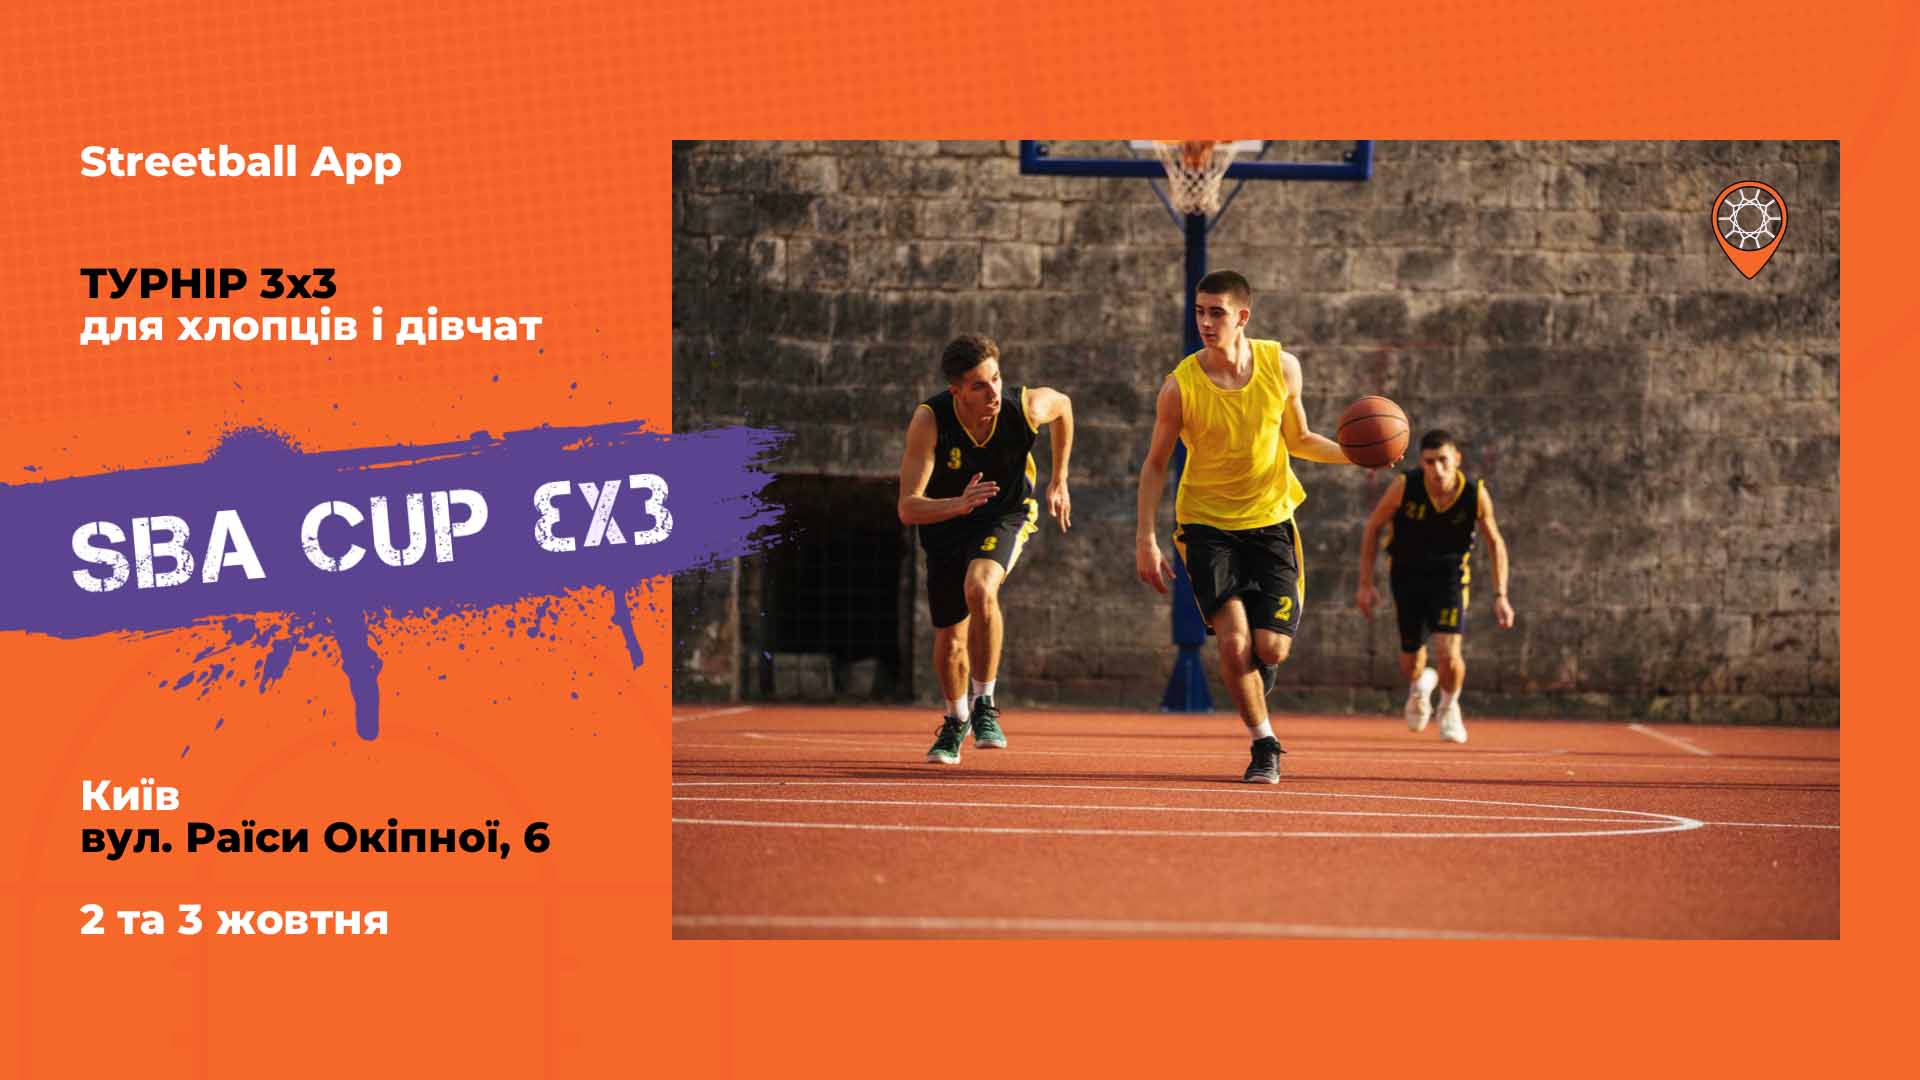 sba cup 3x3 event image